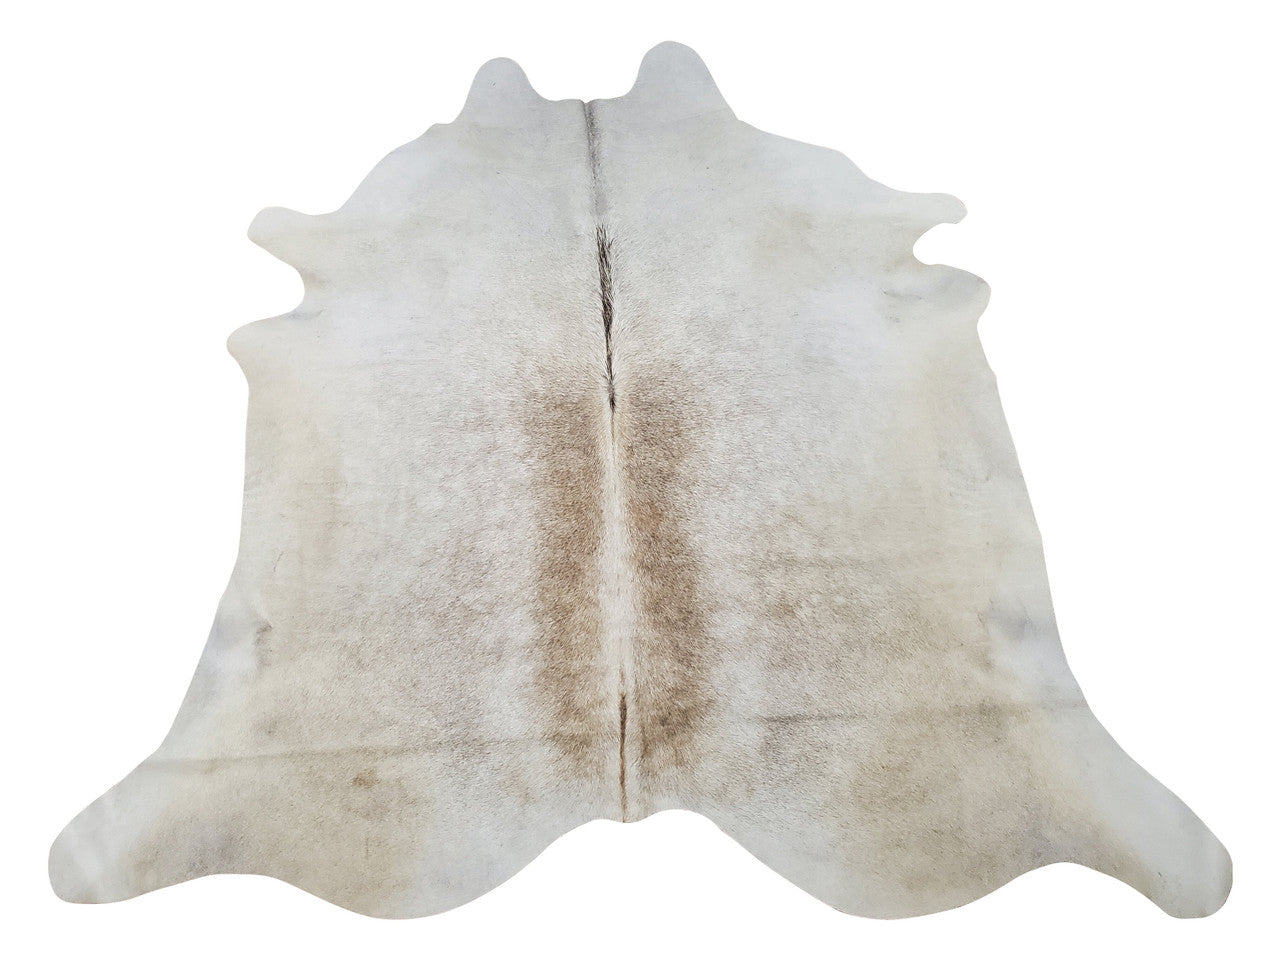 Cowhide rugs are great example of timeless home decor as it adds a stylish and comfortable chic to your space, each cowhide looks and feels different